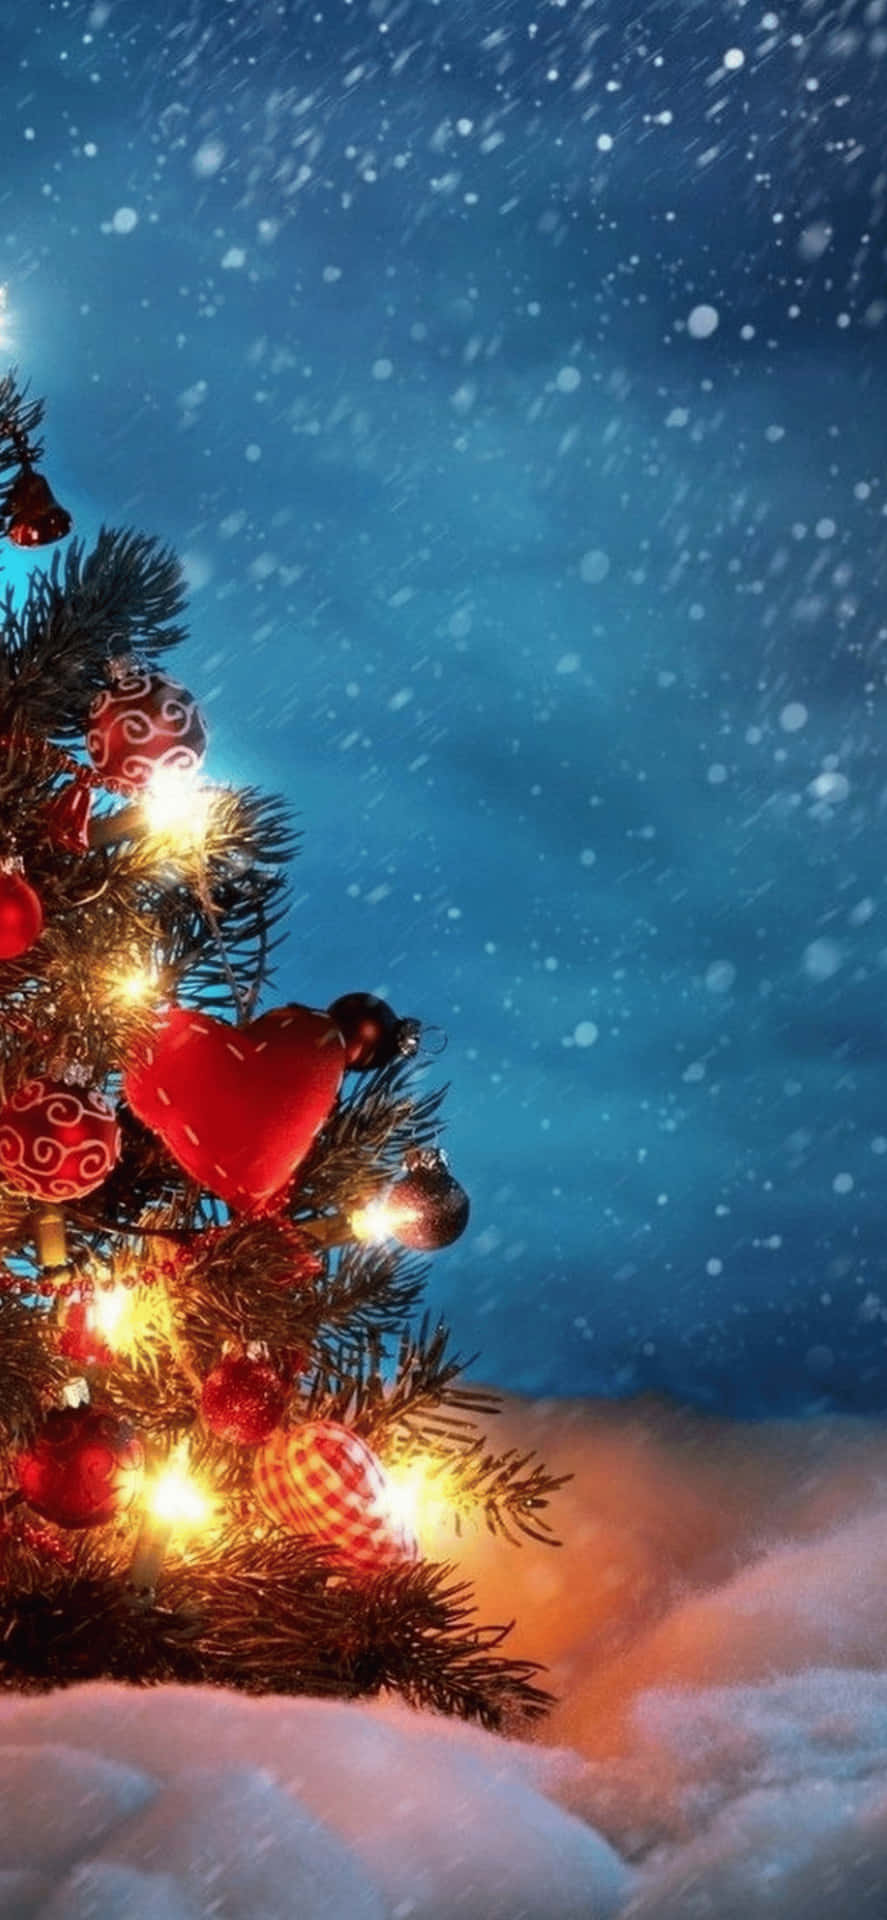 Christmas Tree Iphone Xs Max Winter Background